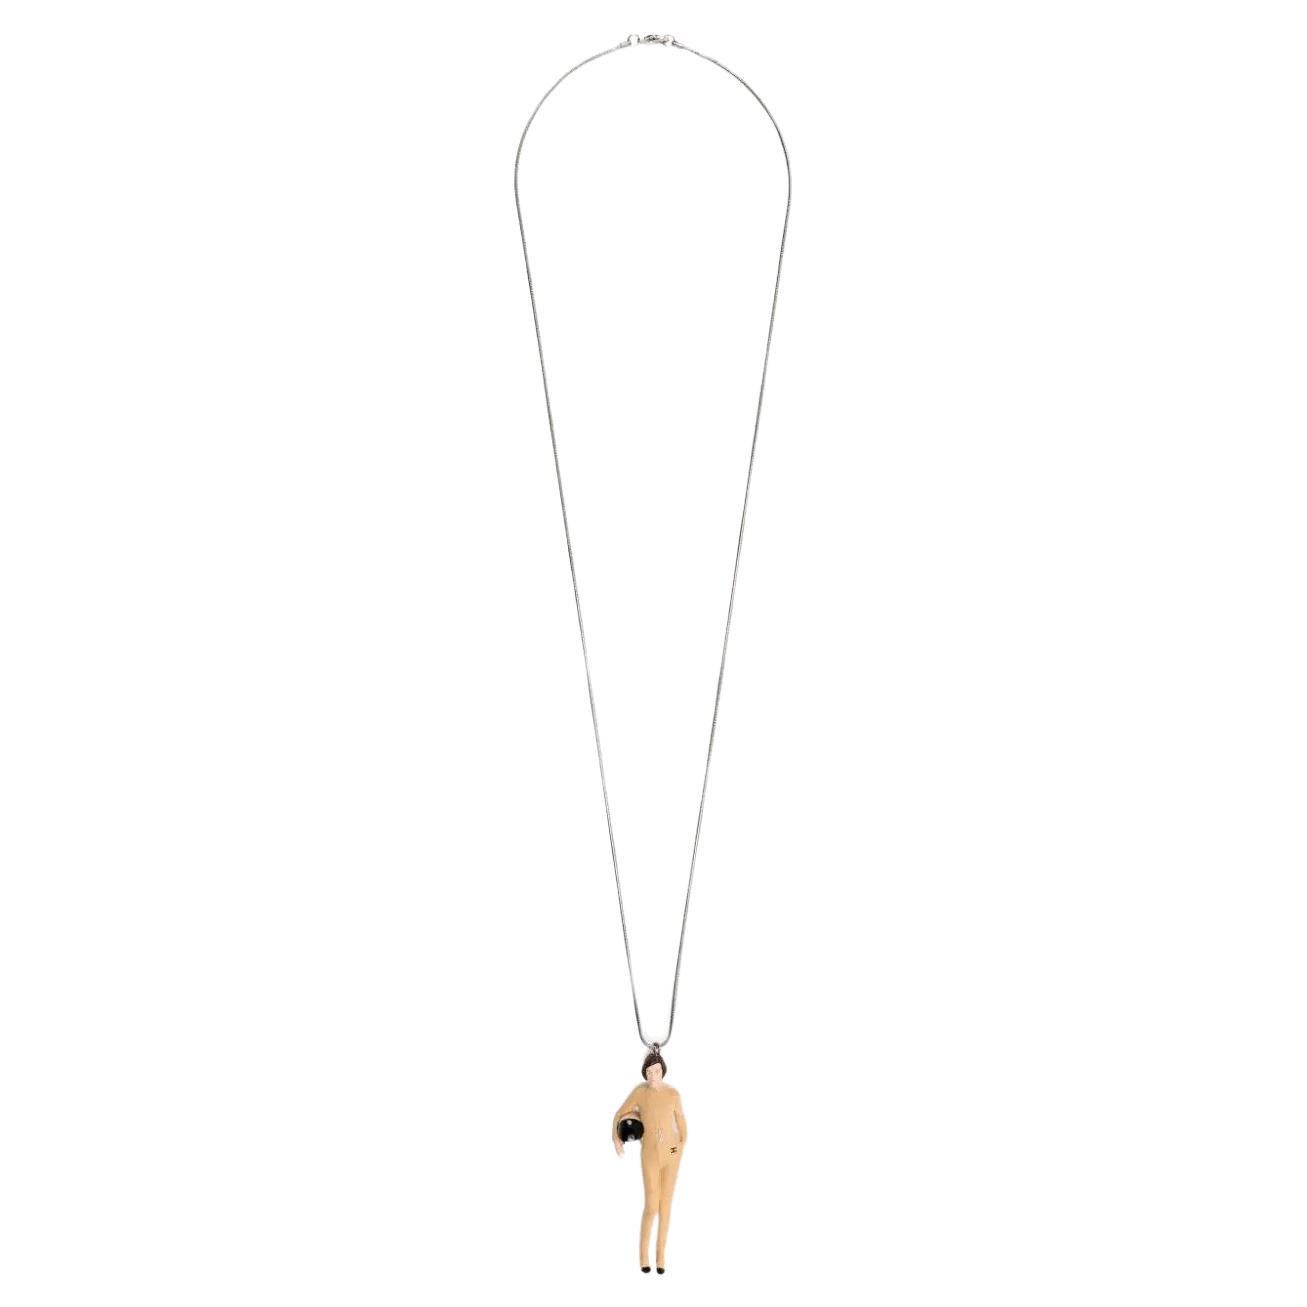 Chanel Keira Knightley Doll Pendant Necklace For Sale